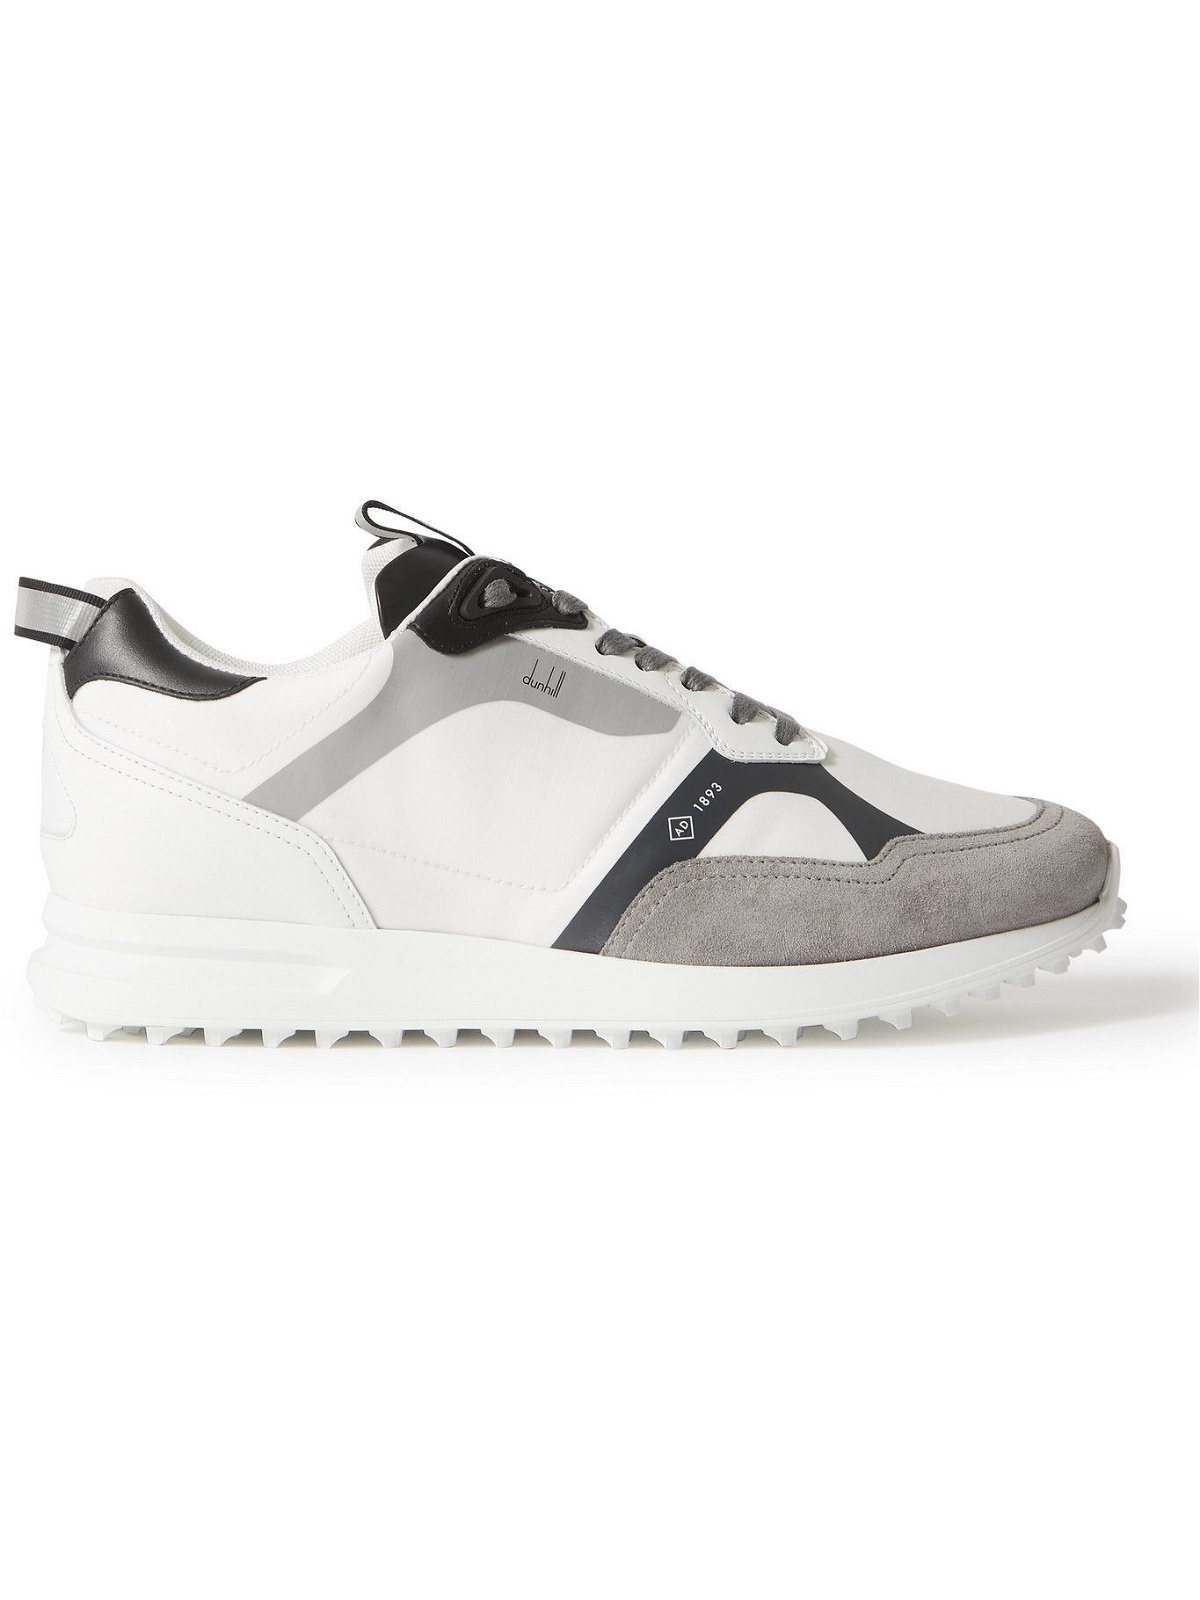 DUNHILL - Radial 2.0 Leather and Suede-Trimmed Ripstop Sneakers - White ...